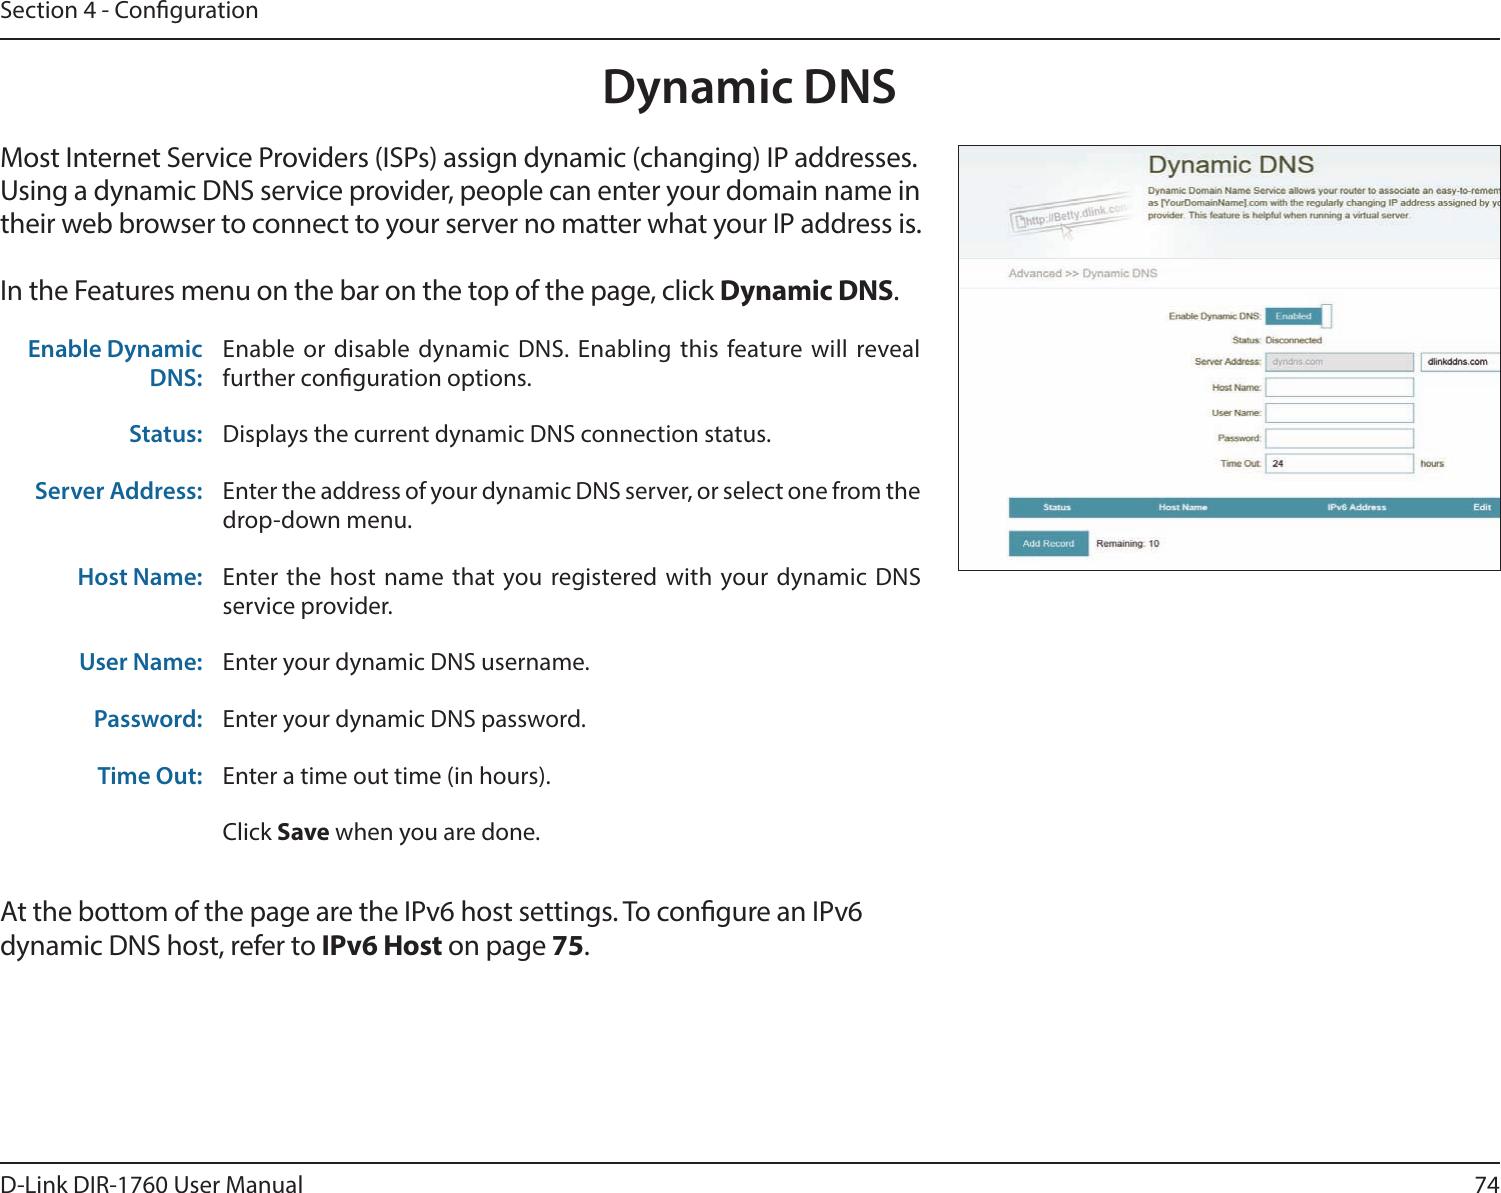 74D-Link DIR-1760 User ManualSection 4 - CongurationDynamic DNSMost Internet Service Providers (ISPs) assign dynamic (changing) IP addresses. Using a dynamic DNS service provider, people can enter your domain name in their web browser to connect to your server no matter what your IP address is.In the Features menu on the bar on the top of the page, click Dynamic DNS.At the bottom of the page are the IPv6 host settings. To congure an IPv6 dynamic DNS host, refer to IPv6 Host on page 75.Enable Dynamic DNS:Enable or disable dynamic DNS. Enabling this feature will reveal further conguration options.Status: Displays the current dynamic DNS connection status.Server Address: Enter the address of your dynamic DNS server, or select one from the drop-down menu.Host Name: Enter the host name that you registered with your dynamic DNS service provider.User Name: Enter your dynamic DNS username.Password: Enter your dynamic DNS password.Time Out: Enter a time out time (in hours).Click Save when you are done.